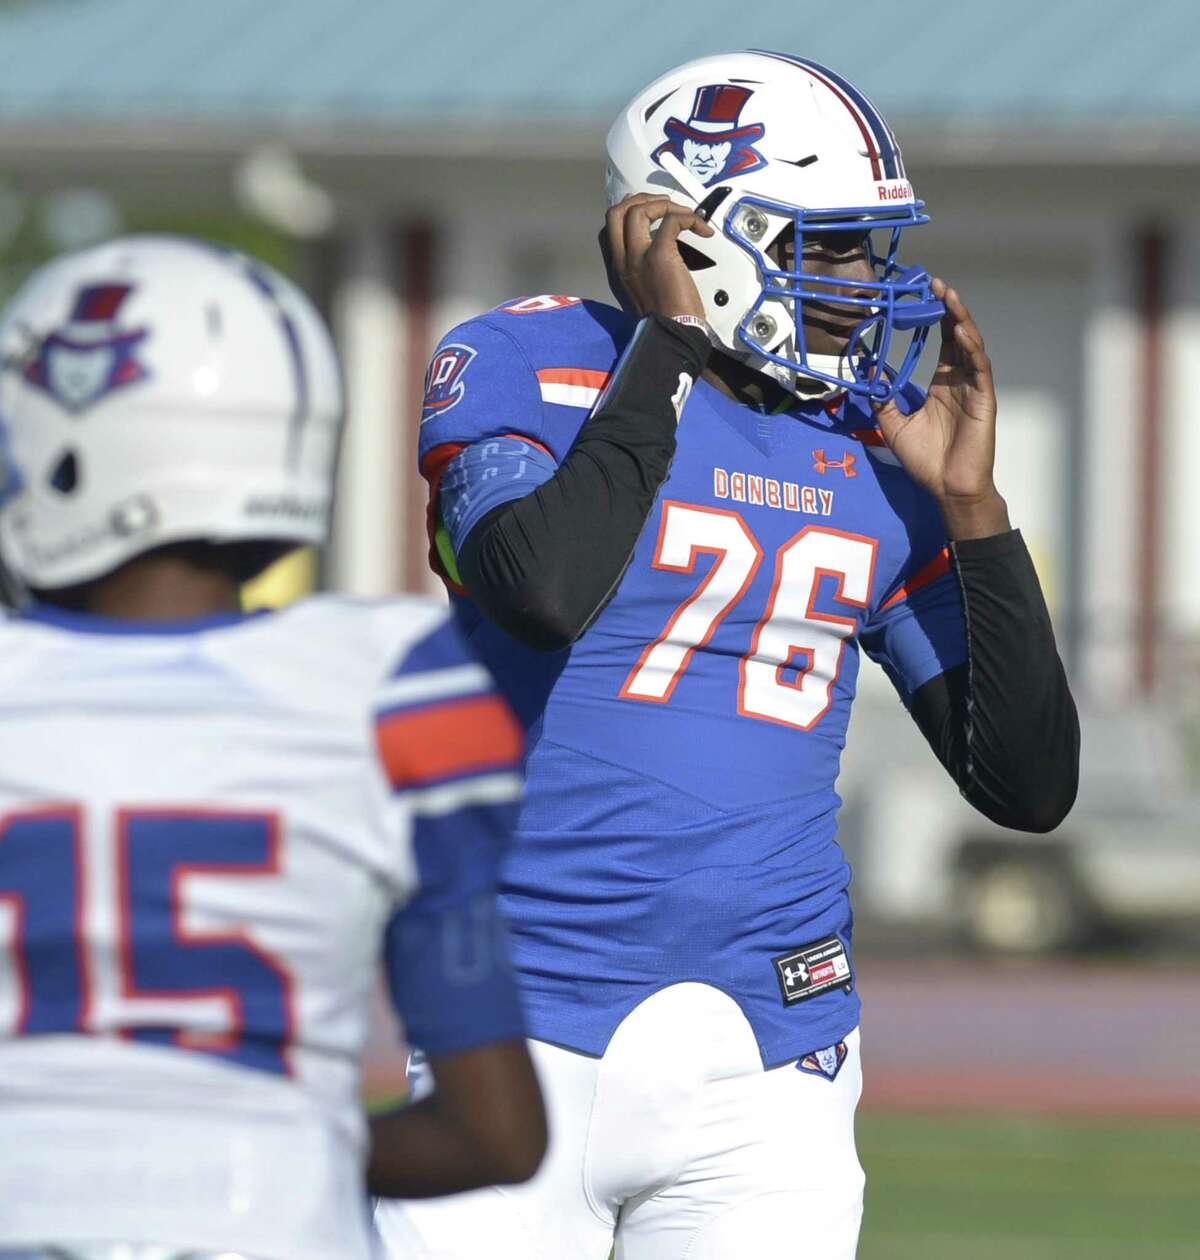 Danbury High School's Jah Joyner plays in the schools Blue & White spring football game on Friday night. June 14, 2019, at Danbury High School, Danbury, Conn. Defensive end Joyner recently committed to play at Boston College.